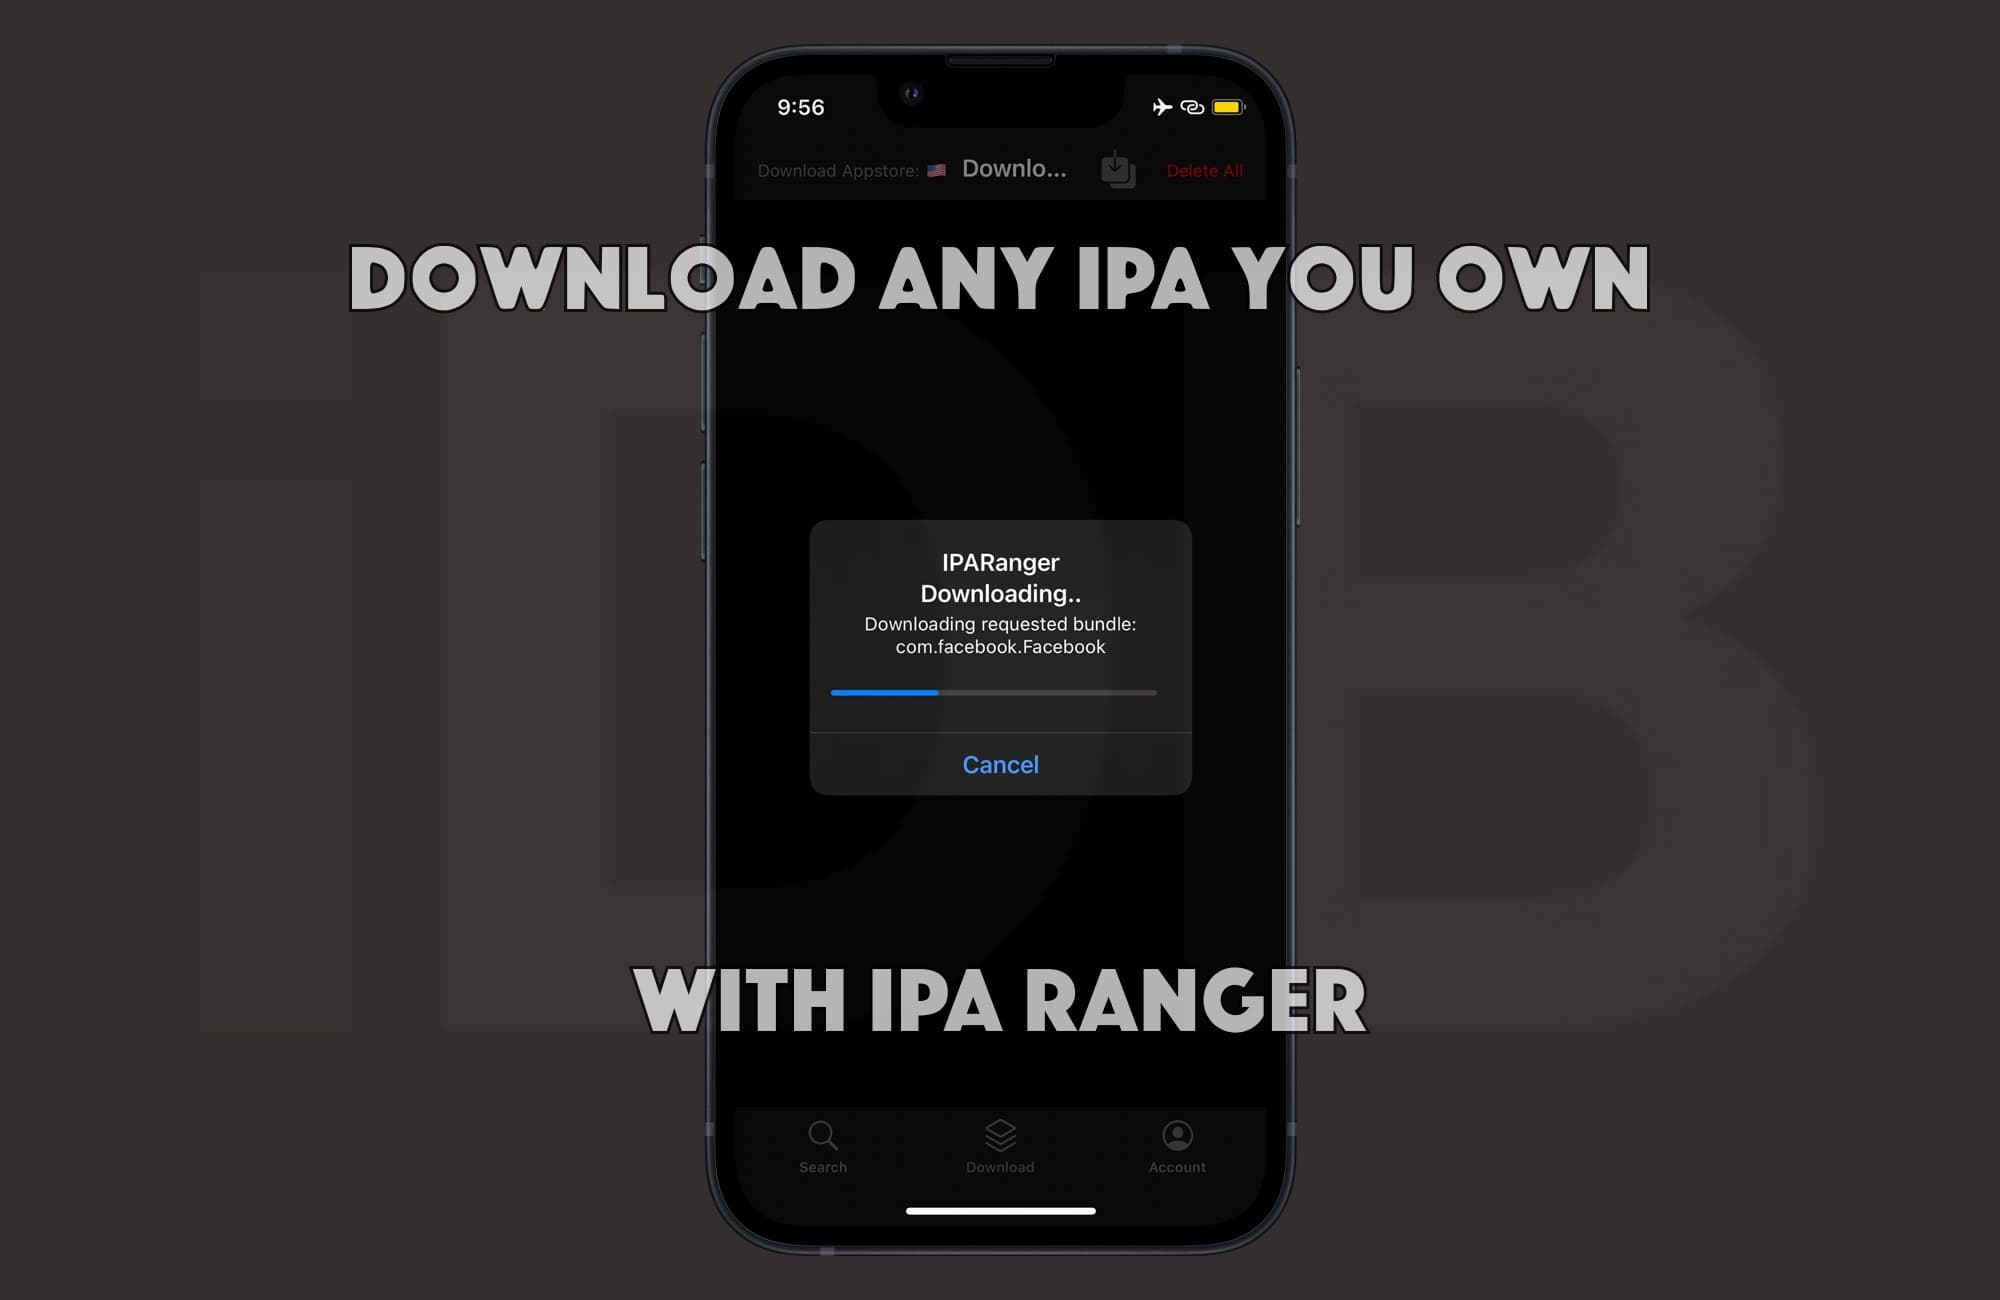 How to use IPA Ranger to download .ipa files directly from the App Store